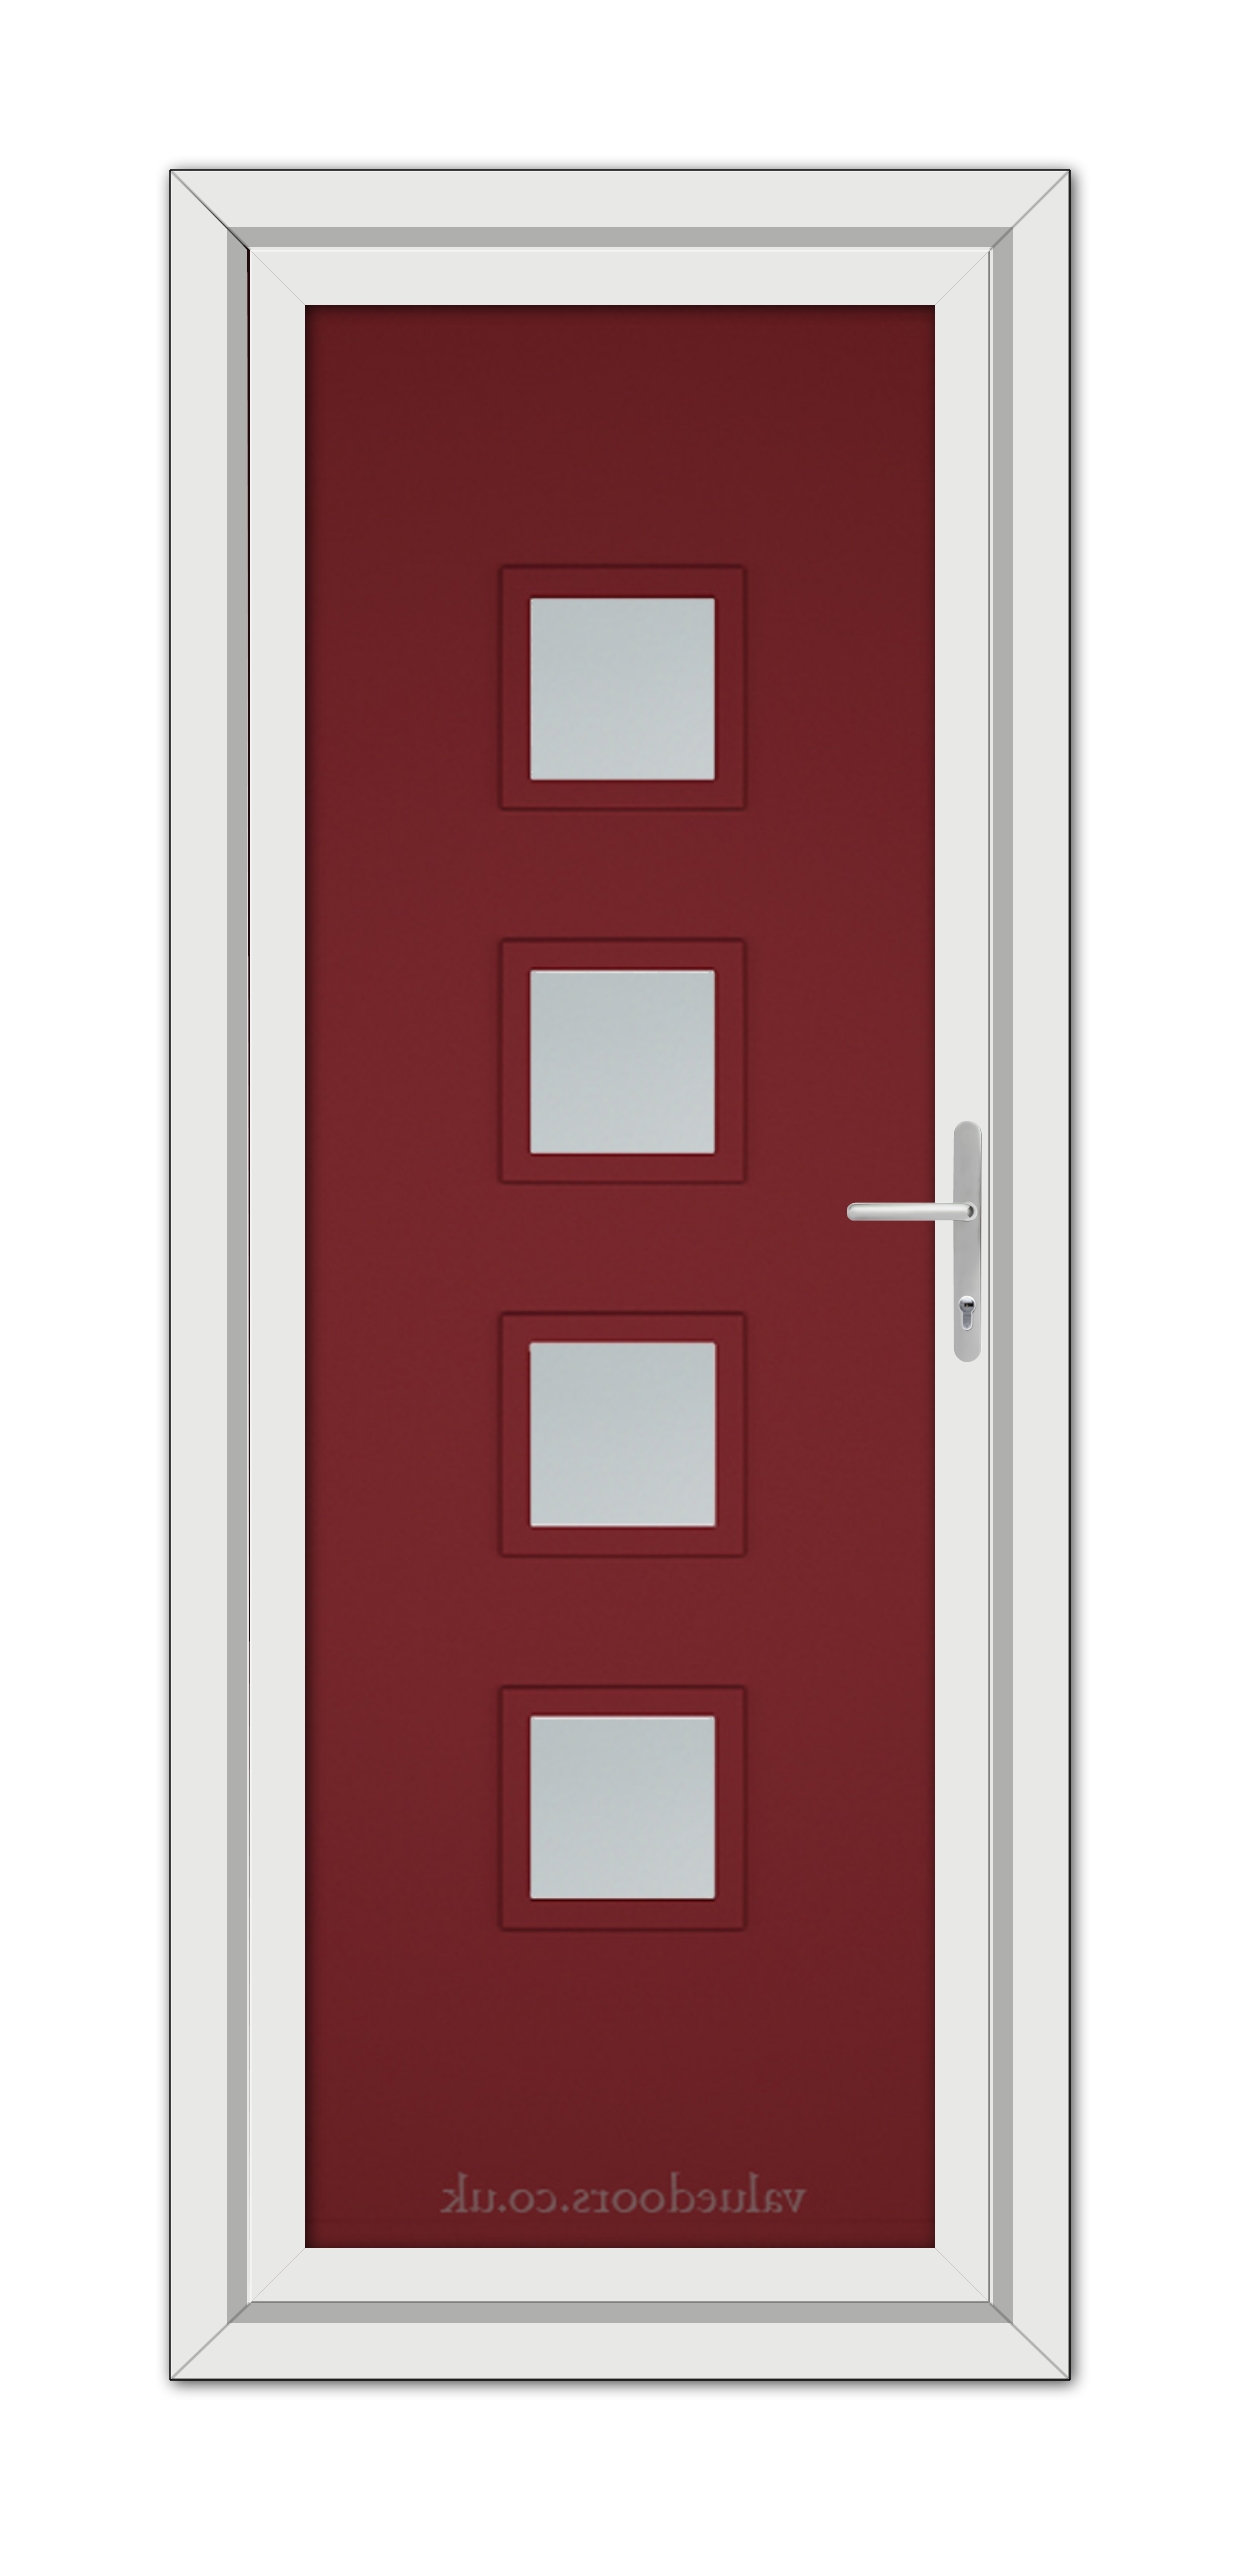 A Red Modern 5034 uPVC door with four rectangular glass panels, a silver handle, and a white frame, viewed from the front.